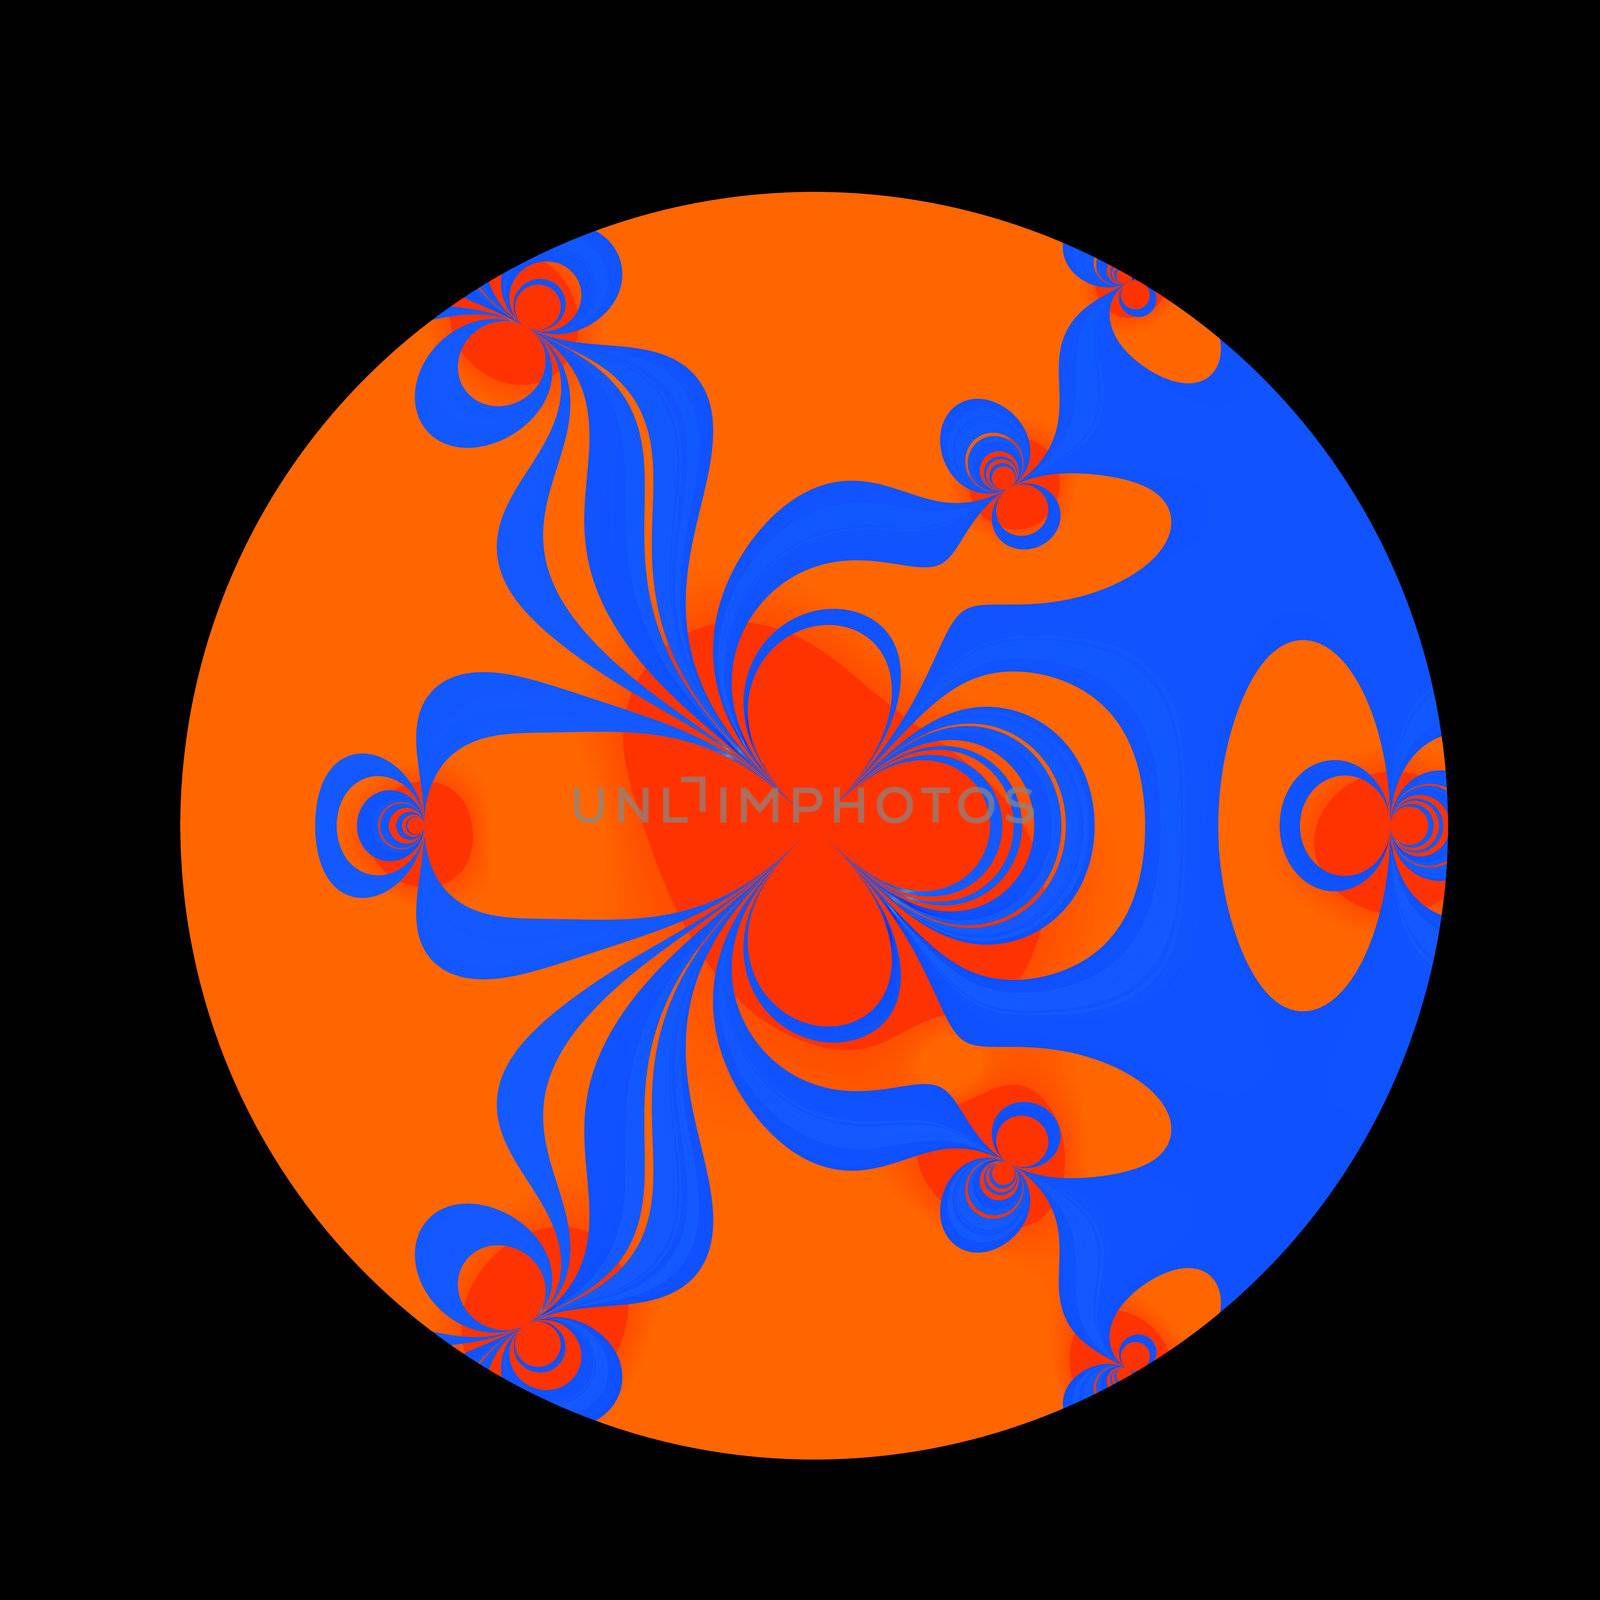 An abstract blue and orange image done in the Retro style of Midcentury Modern textiles.